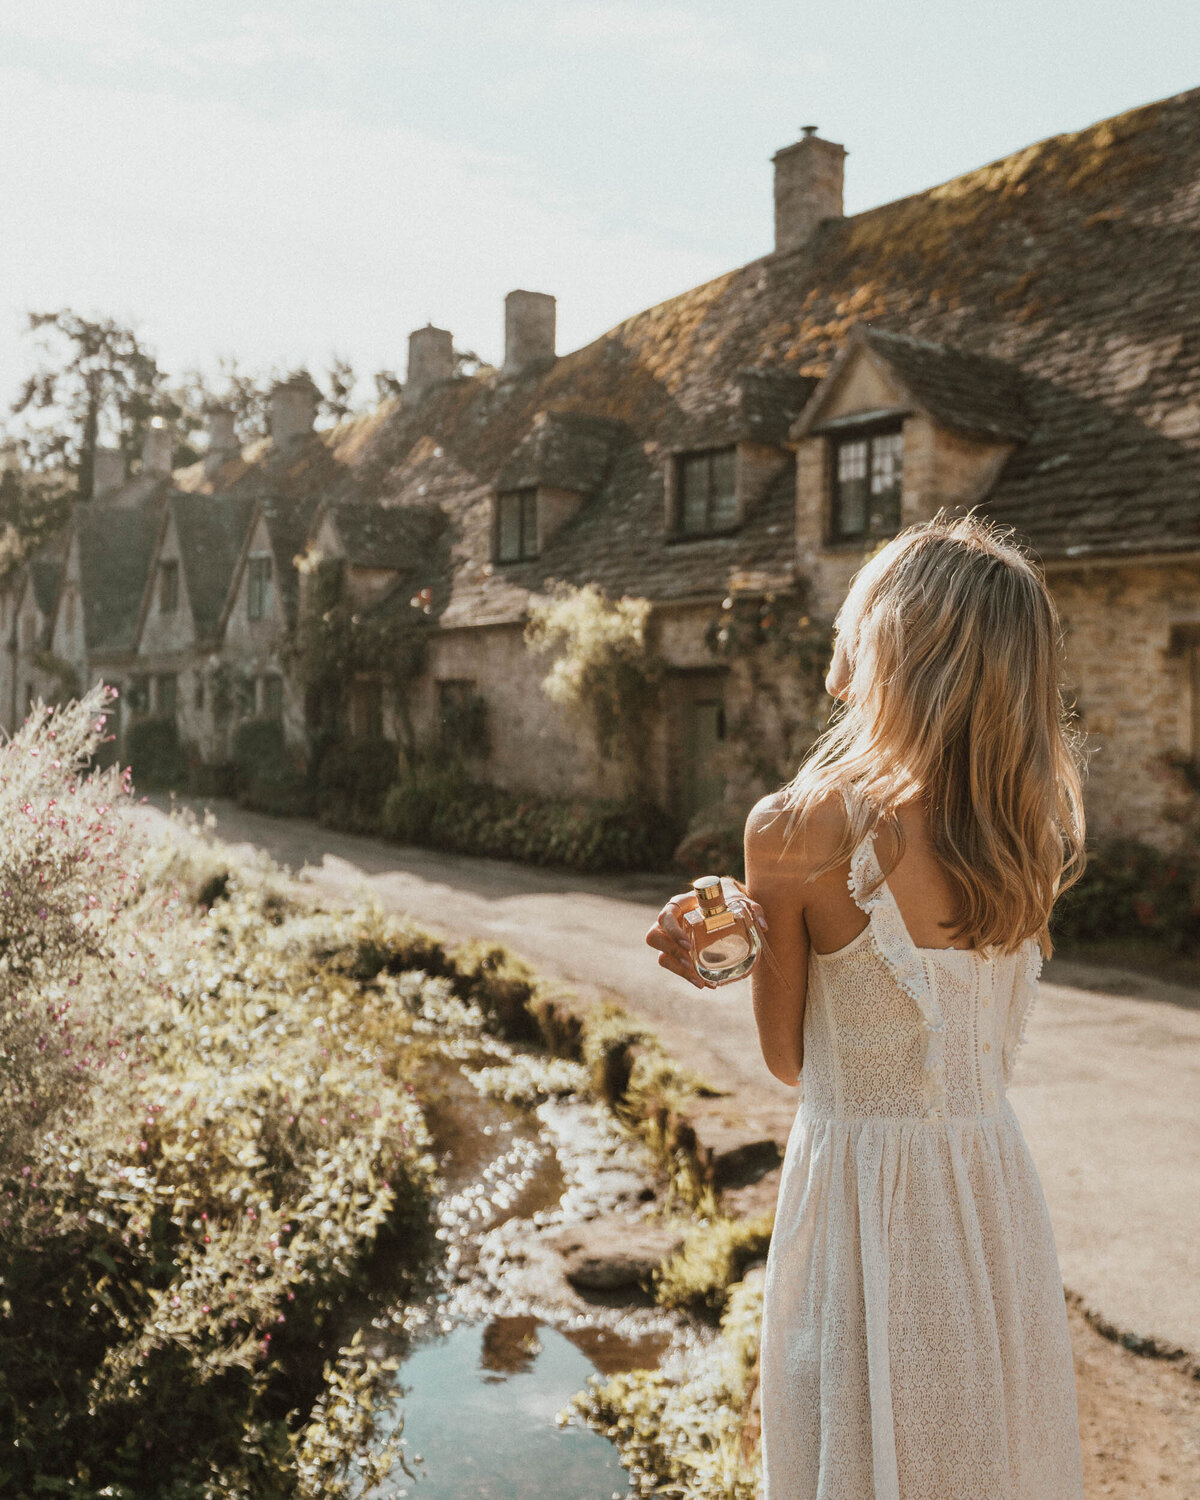 Cotswolds-England-Find-Us-Lost-